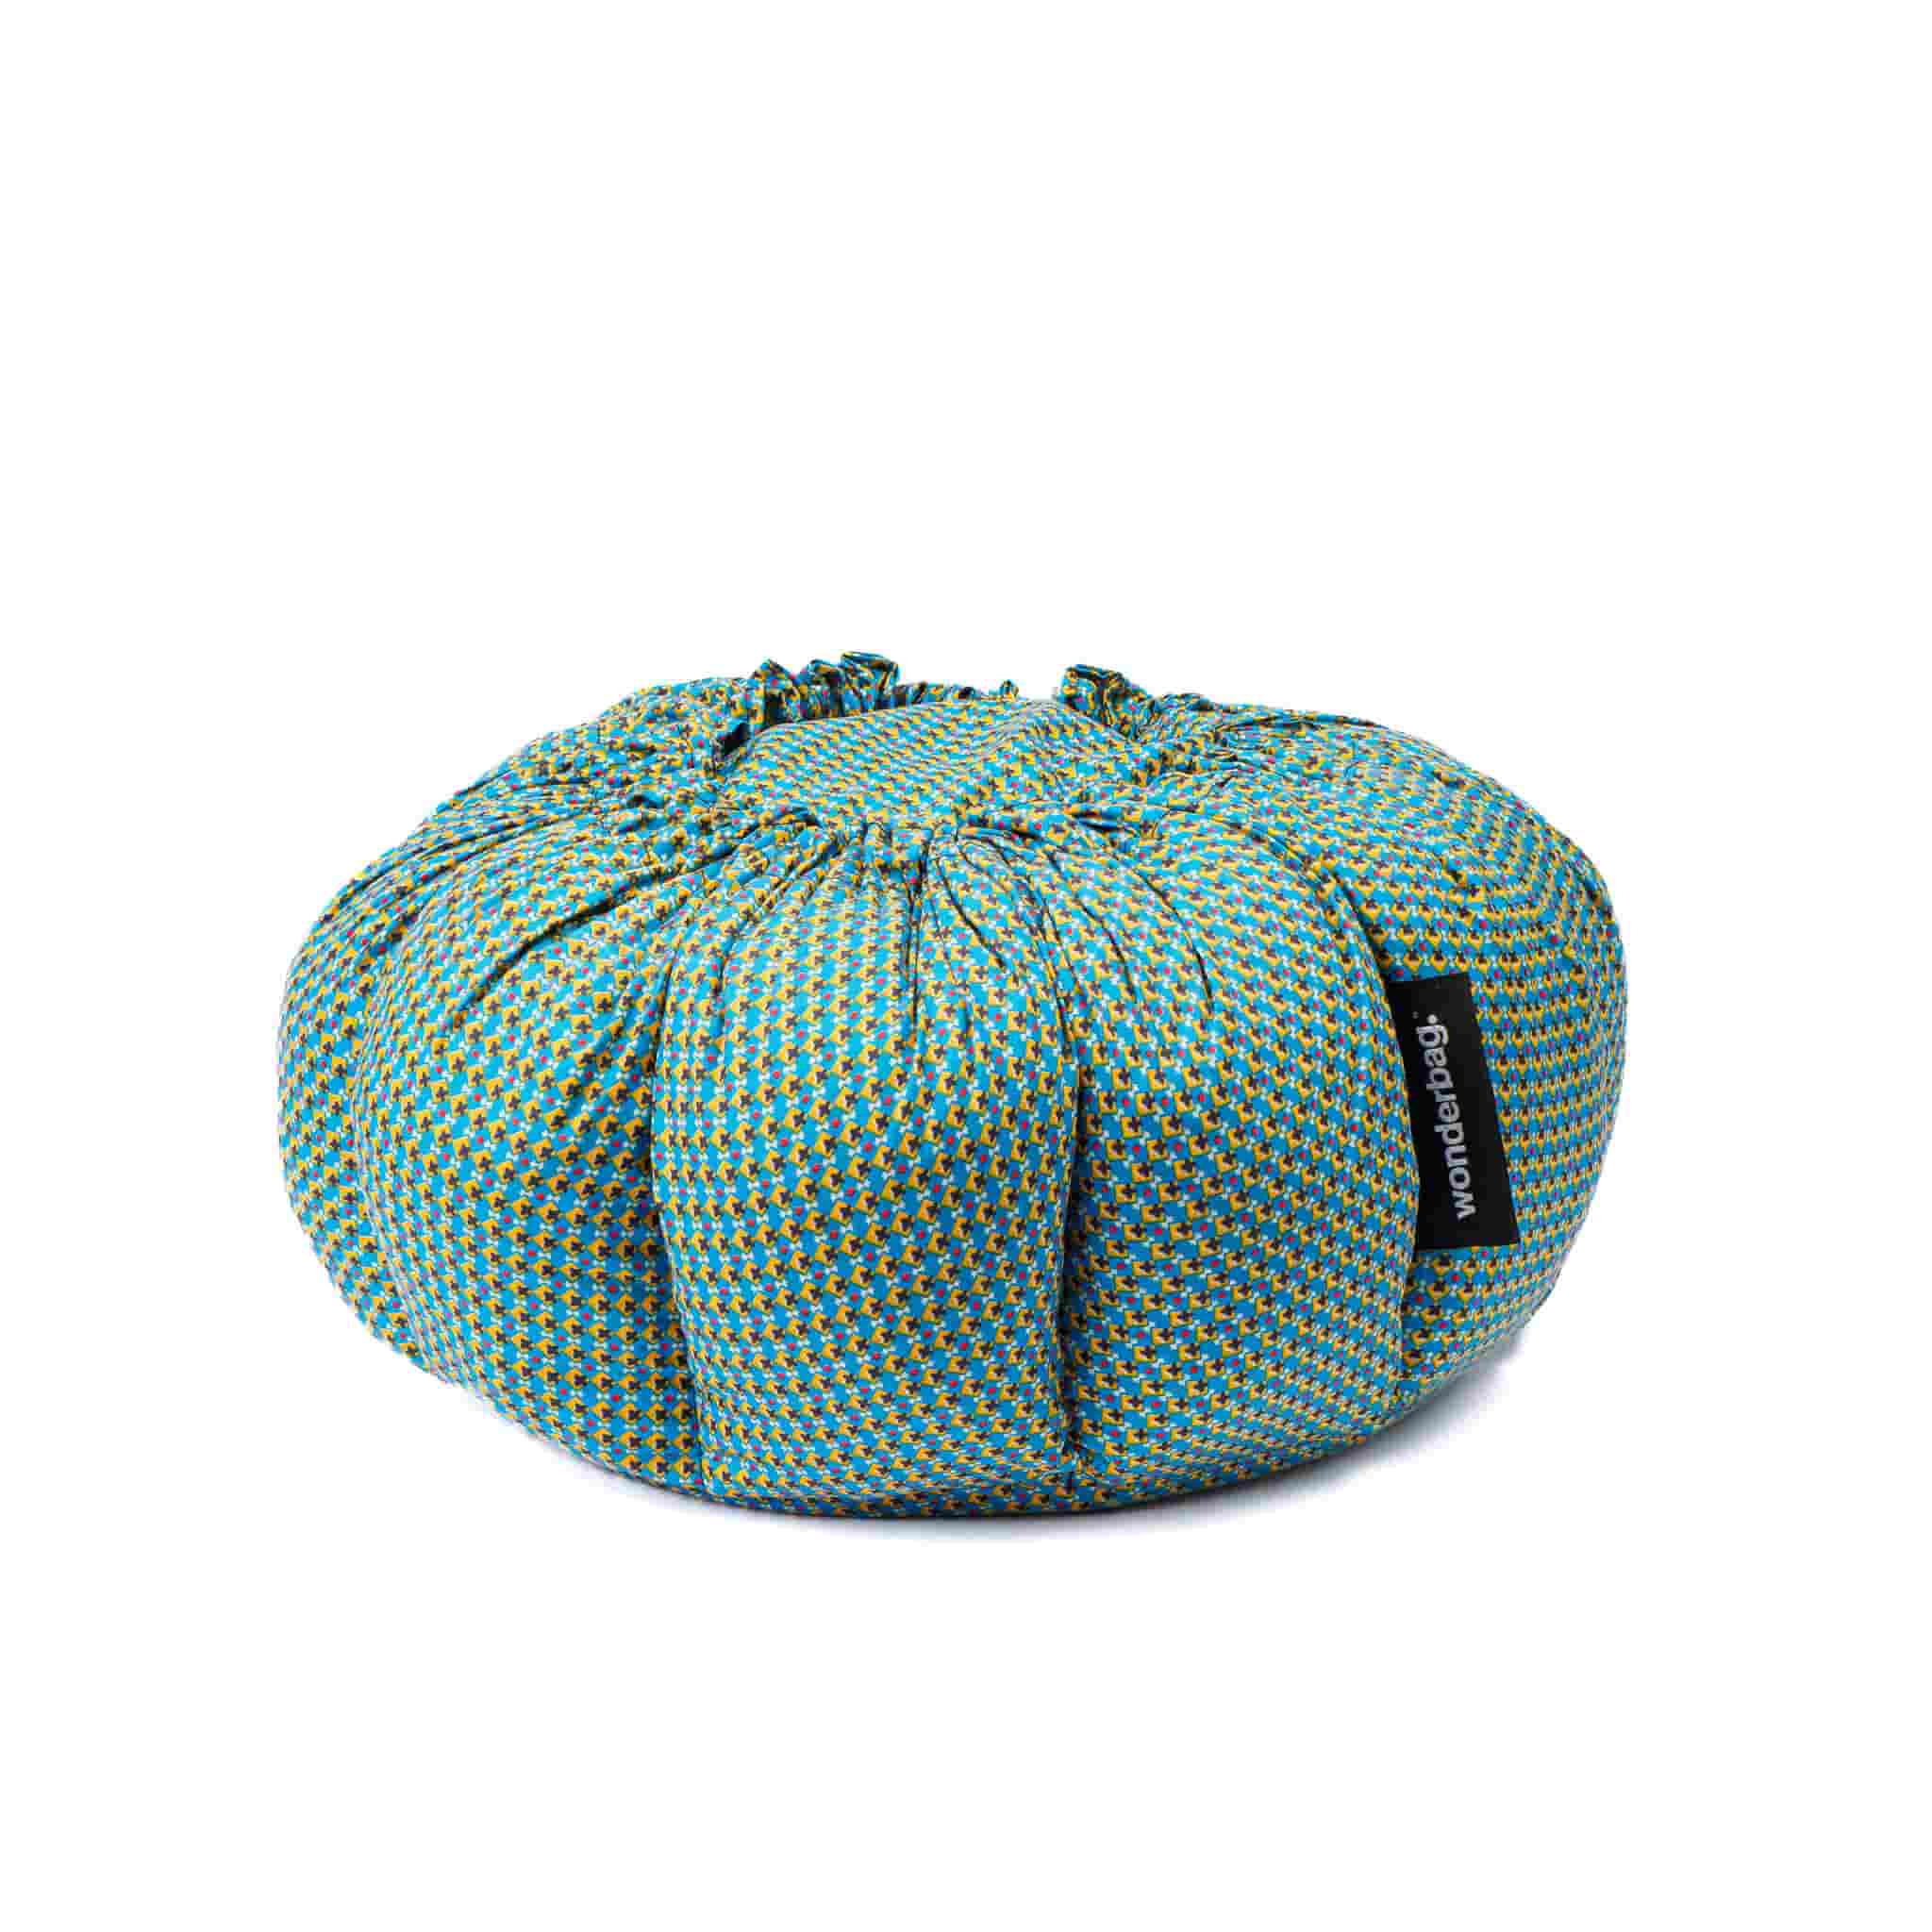 Wonderbag Non-Electric Slow Cooker, Turquoise